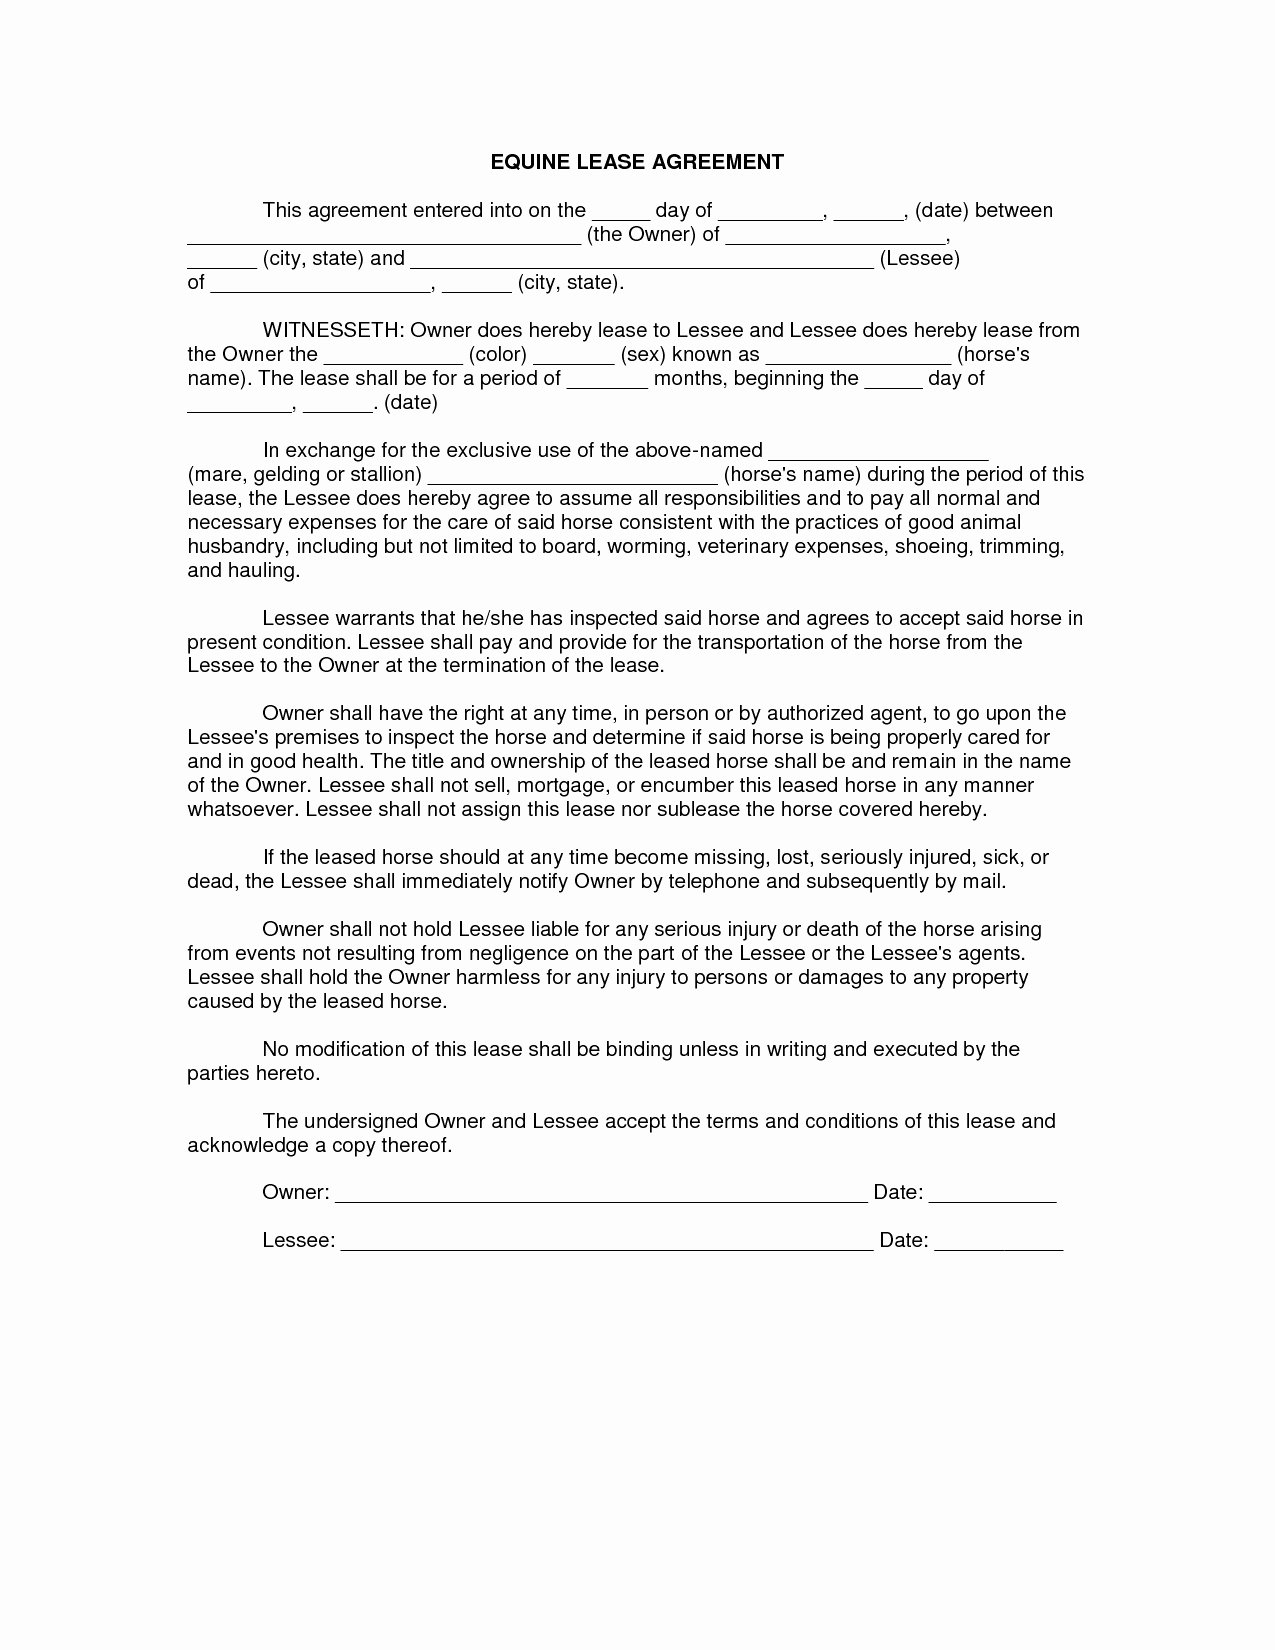 Horse Lease Agreements Template Inspirational Equine Lease Agreement